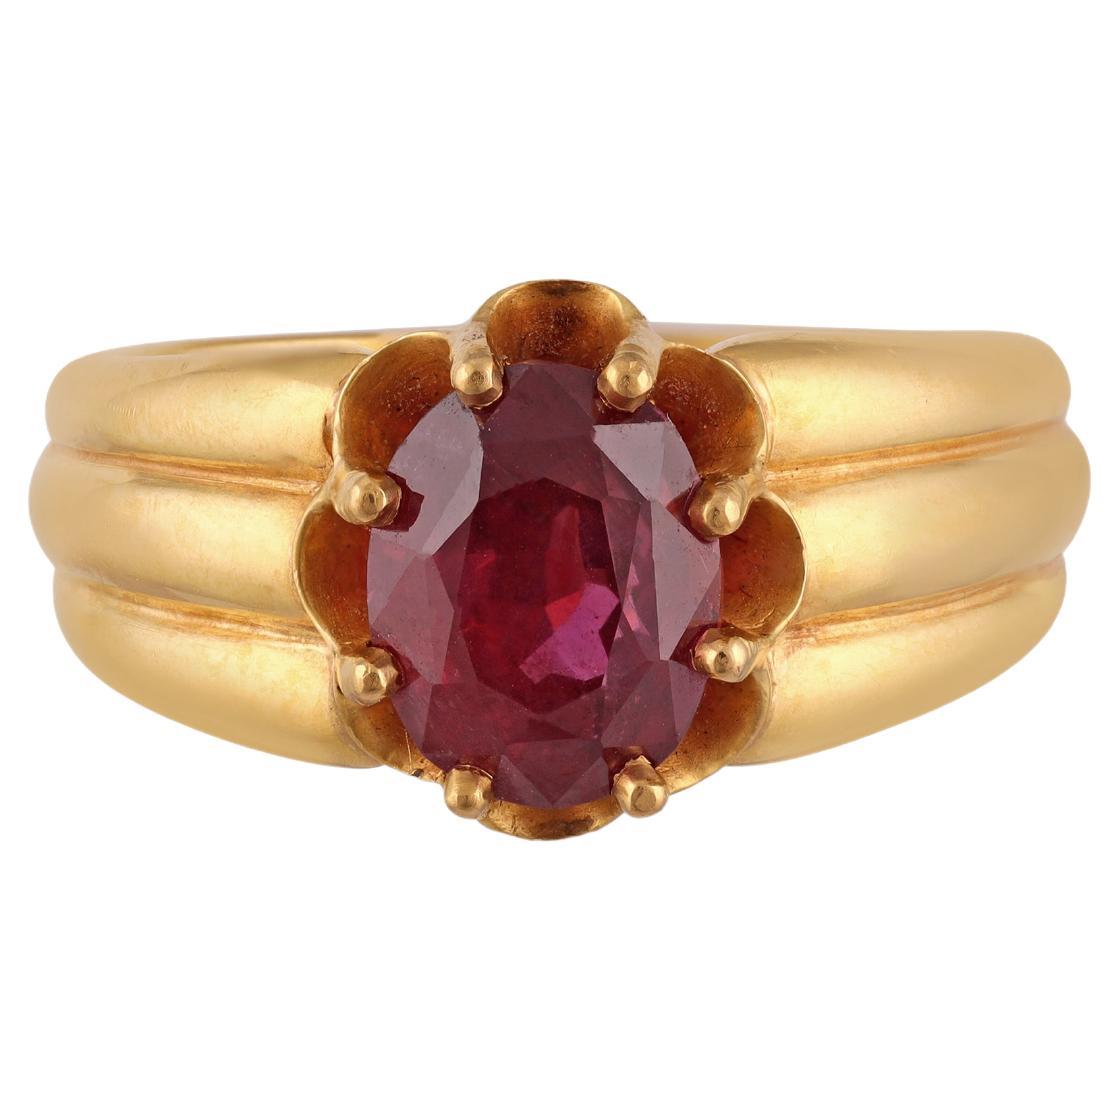 3.27 Carat High Clear Natural Mozambique Ruby Ring in 22k Gold For Sale